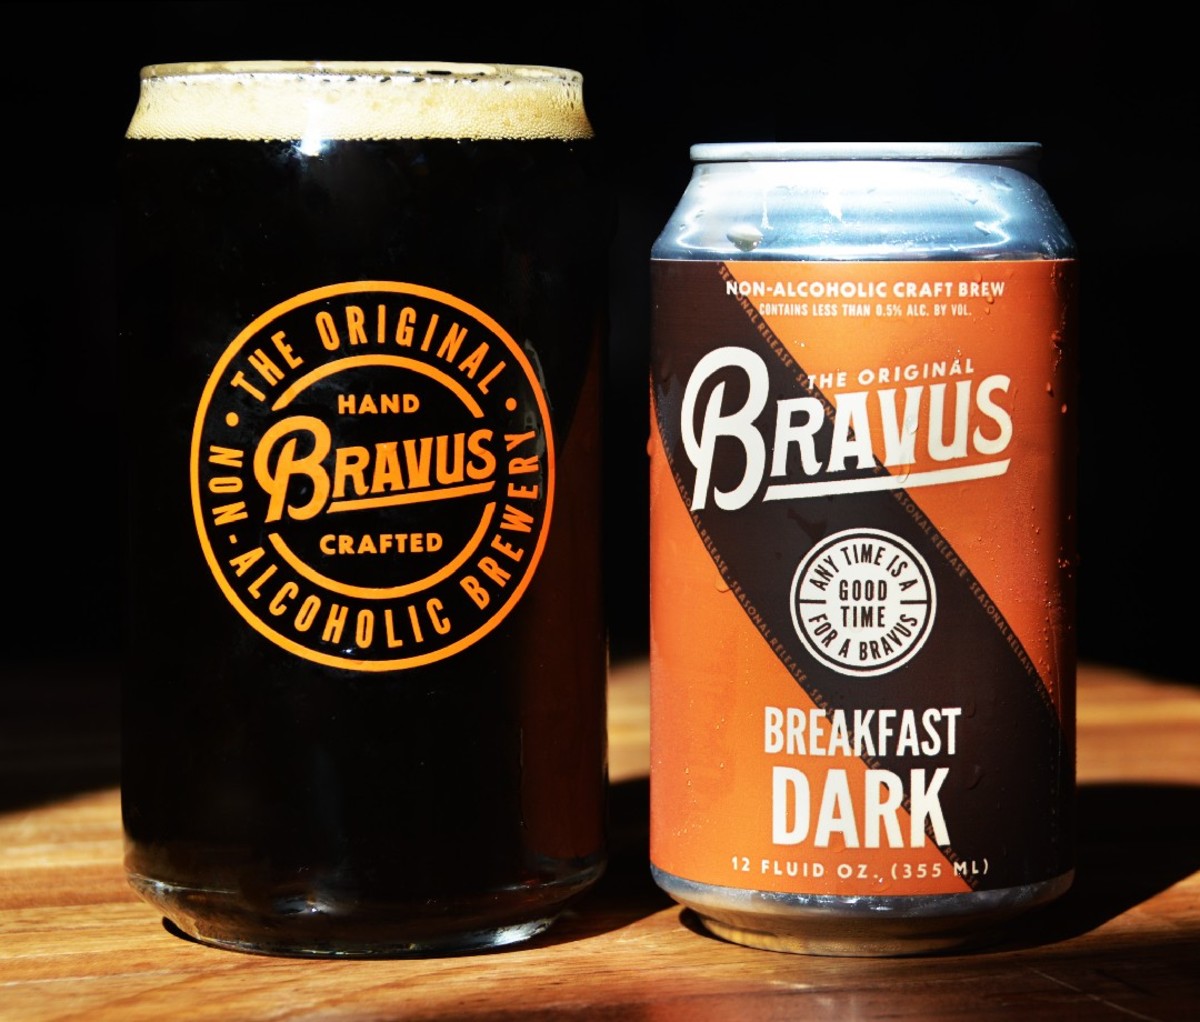 Can and full pint of Bravus Breakfast Dark on a wooden surface